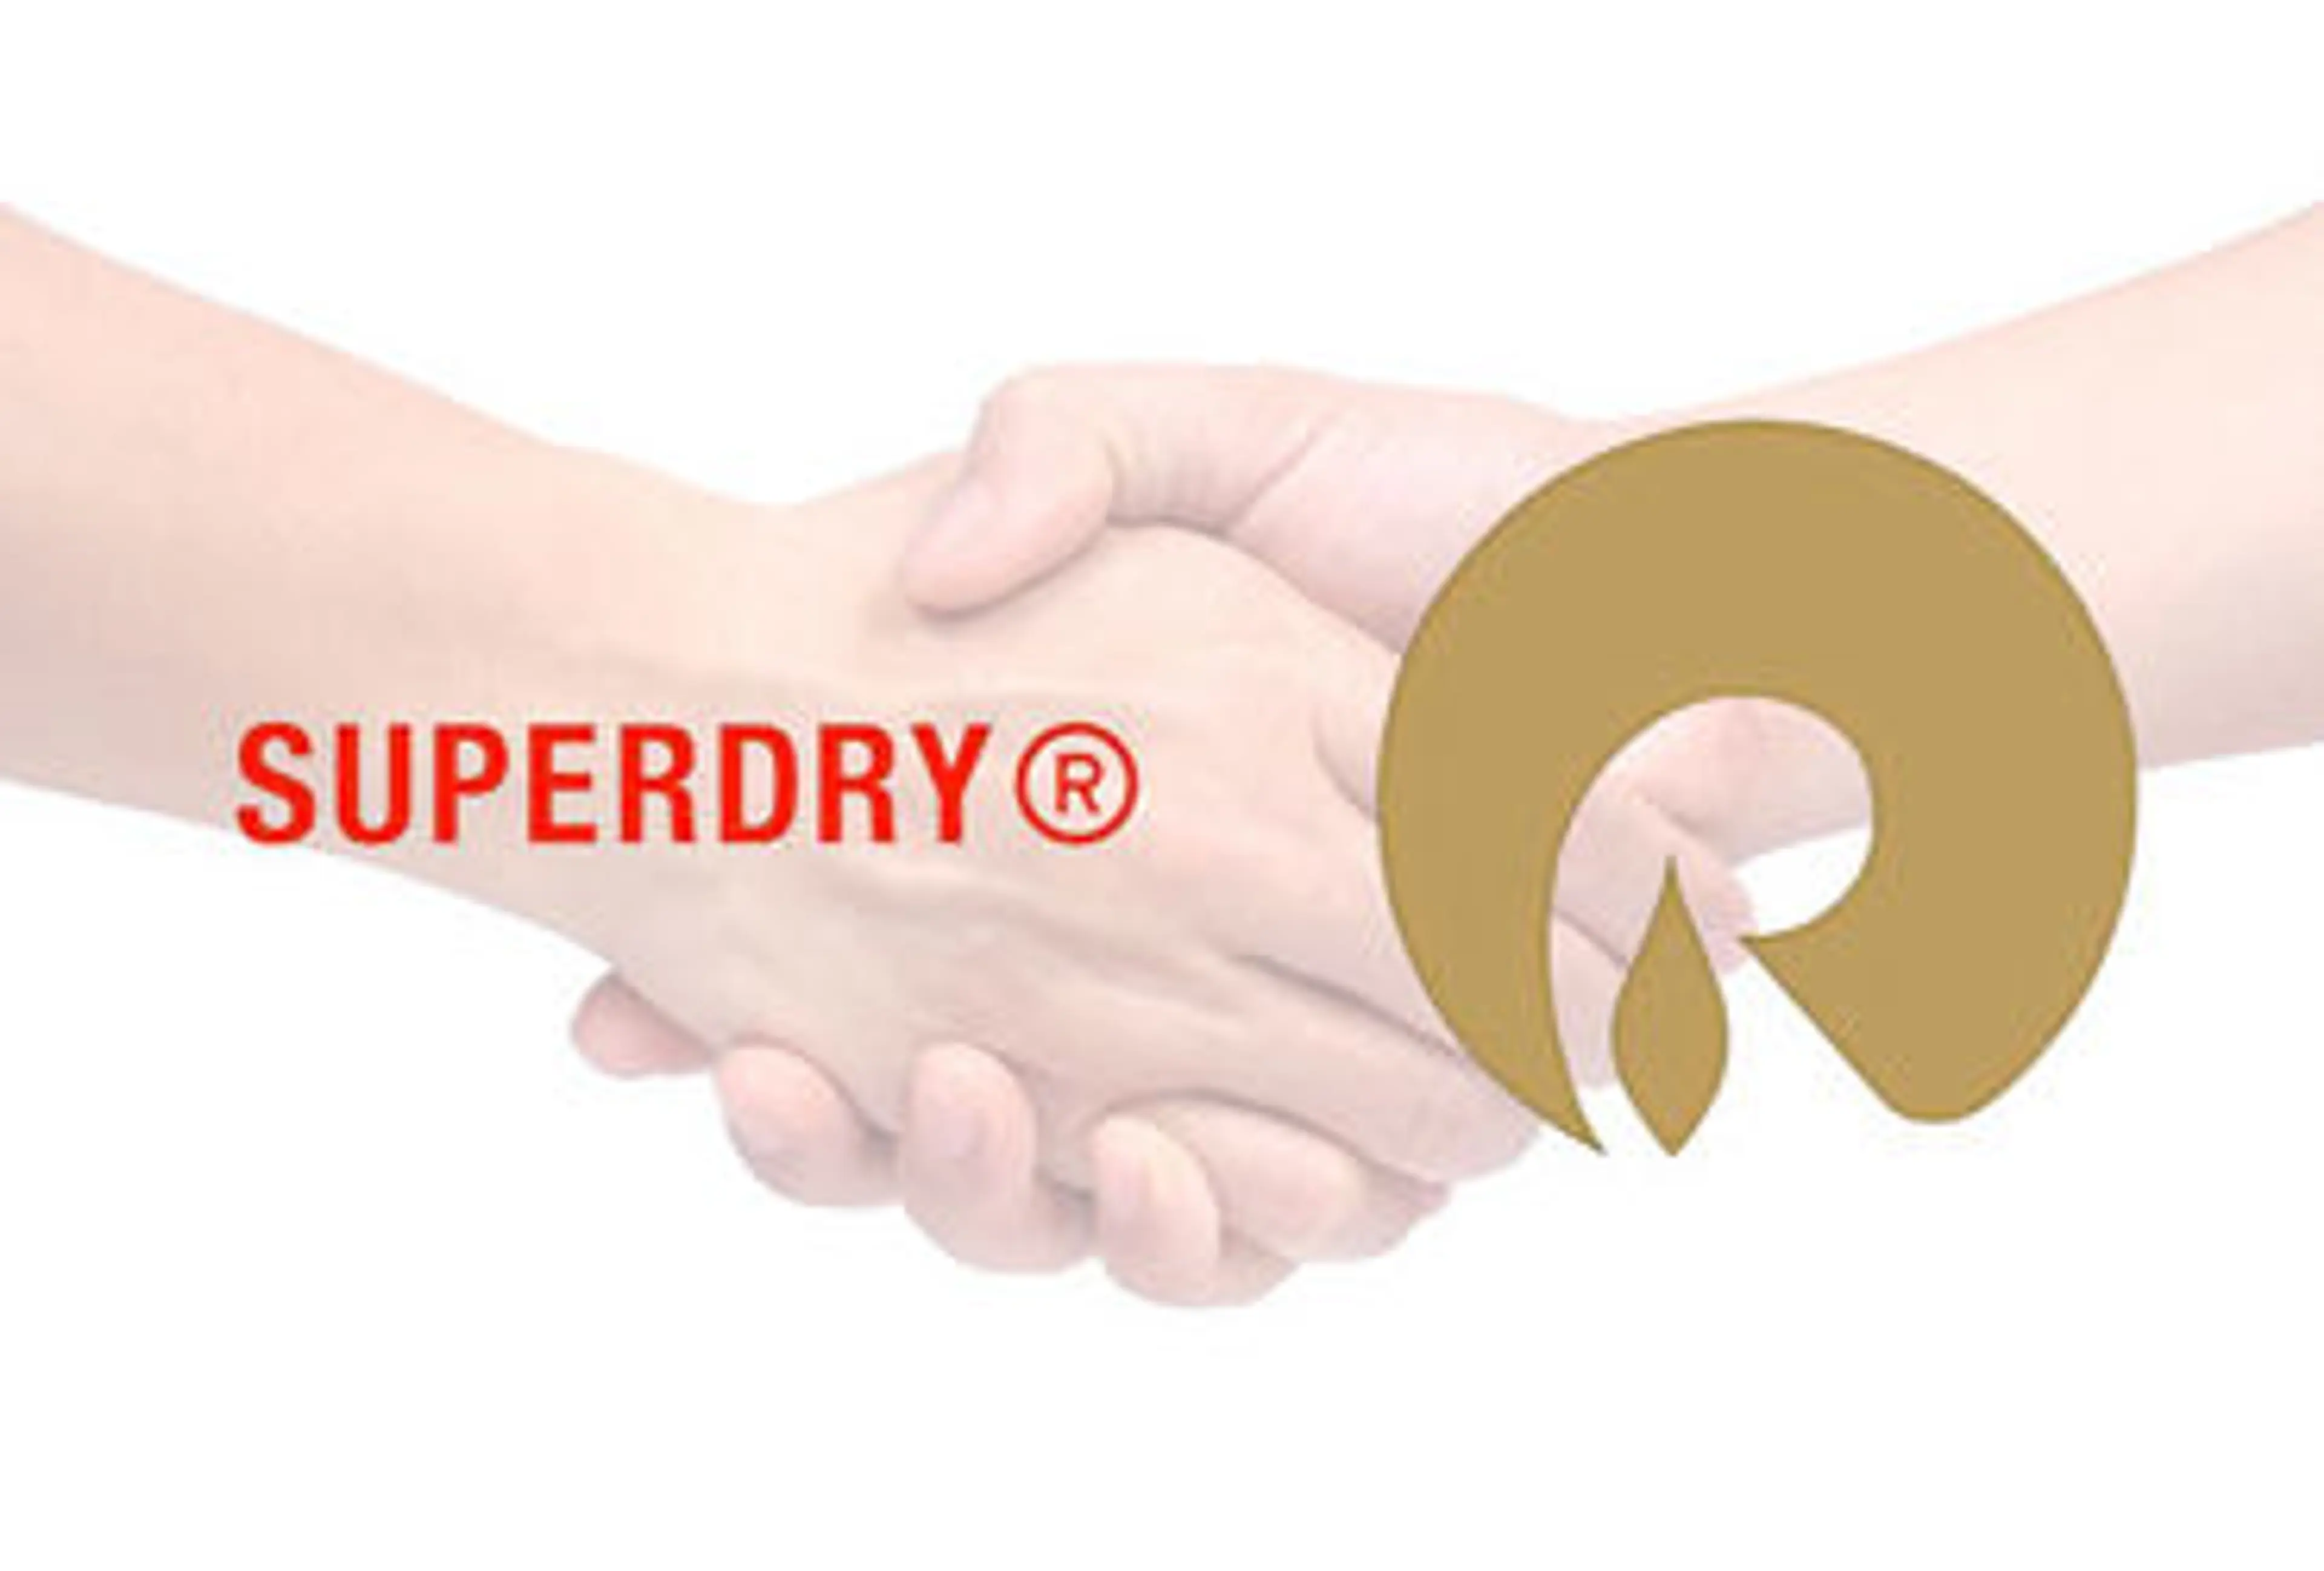 Reliance acquires majority ownership of Superdry IP for Indian territory